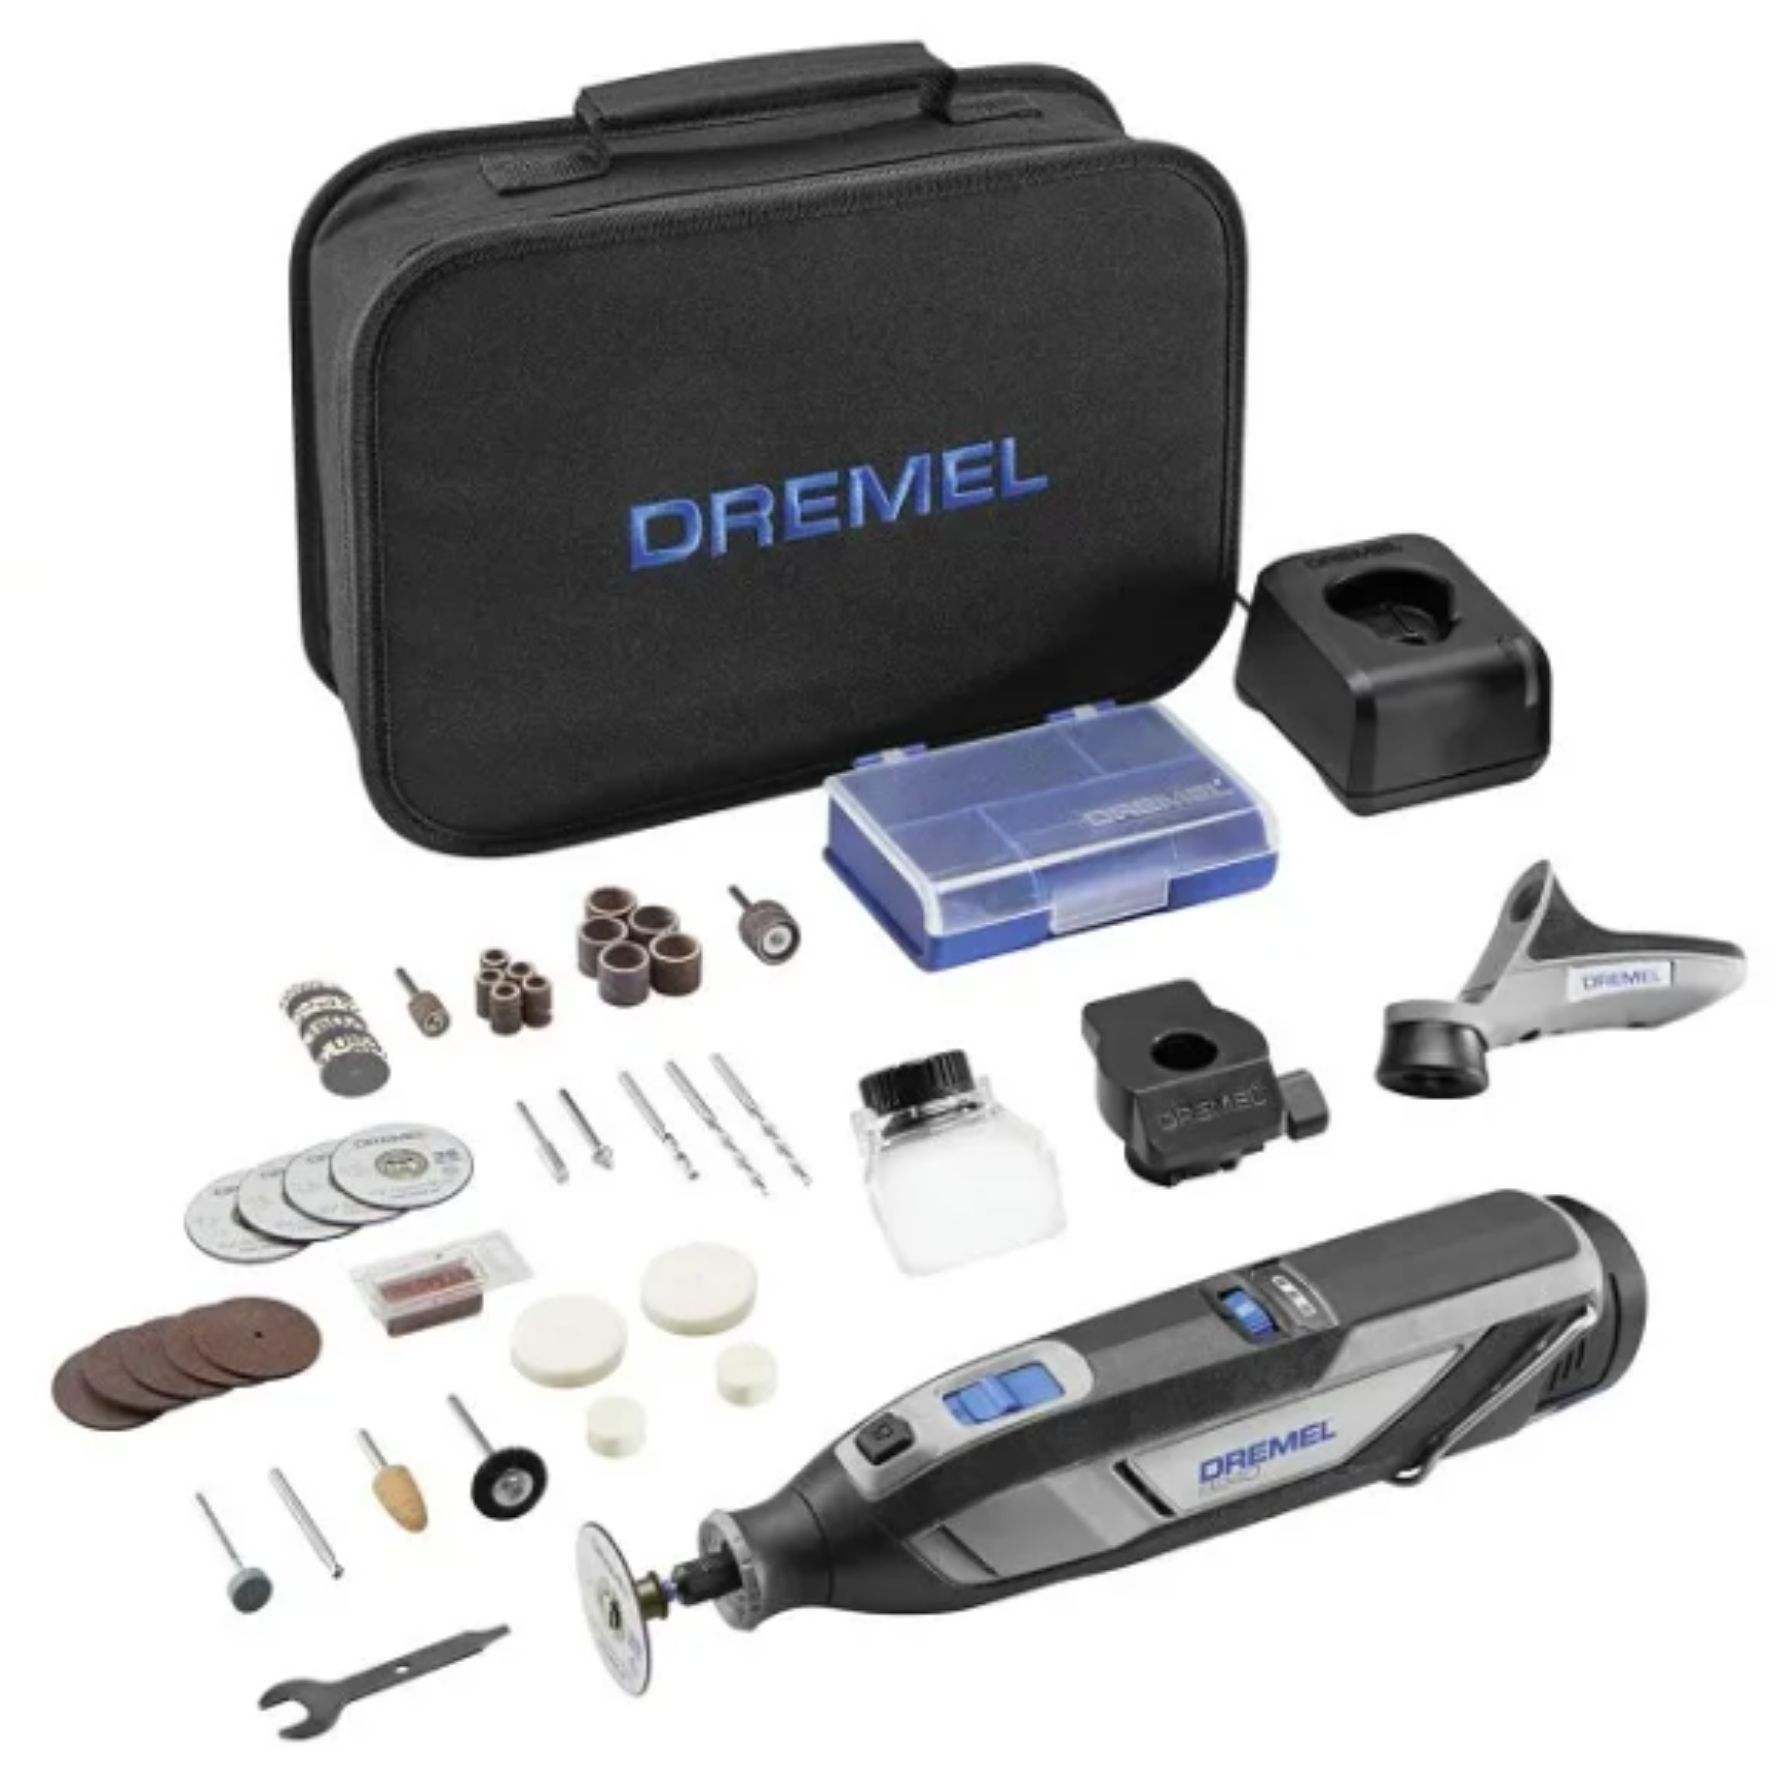 Dremel 8240-3/45 Cordless 12V ROTARY TOOL KIT With 3 ATTACHMENTS & 45PC ACCESSORIES